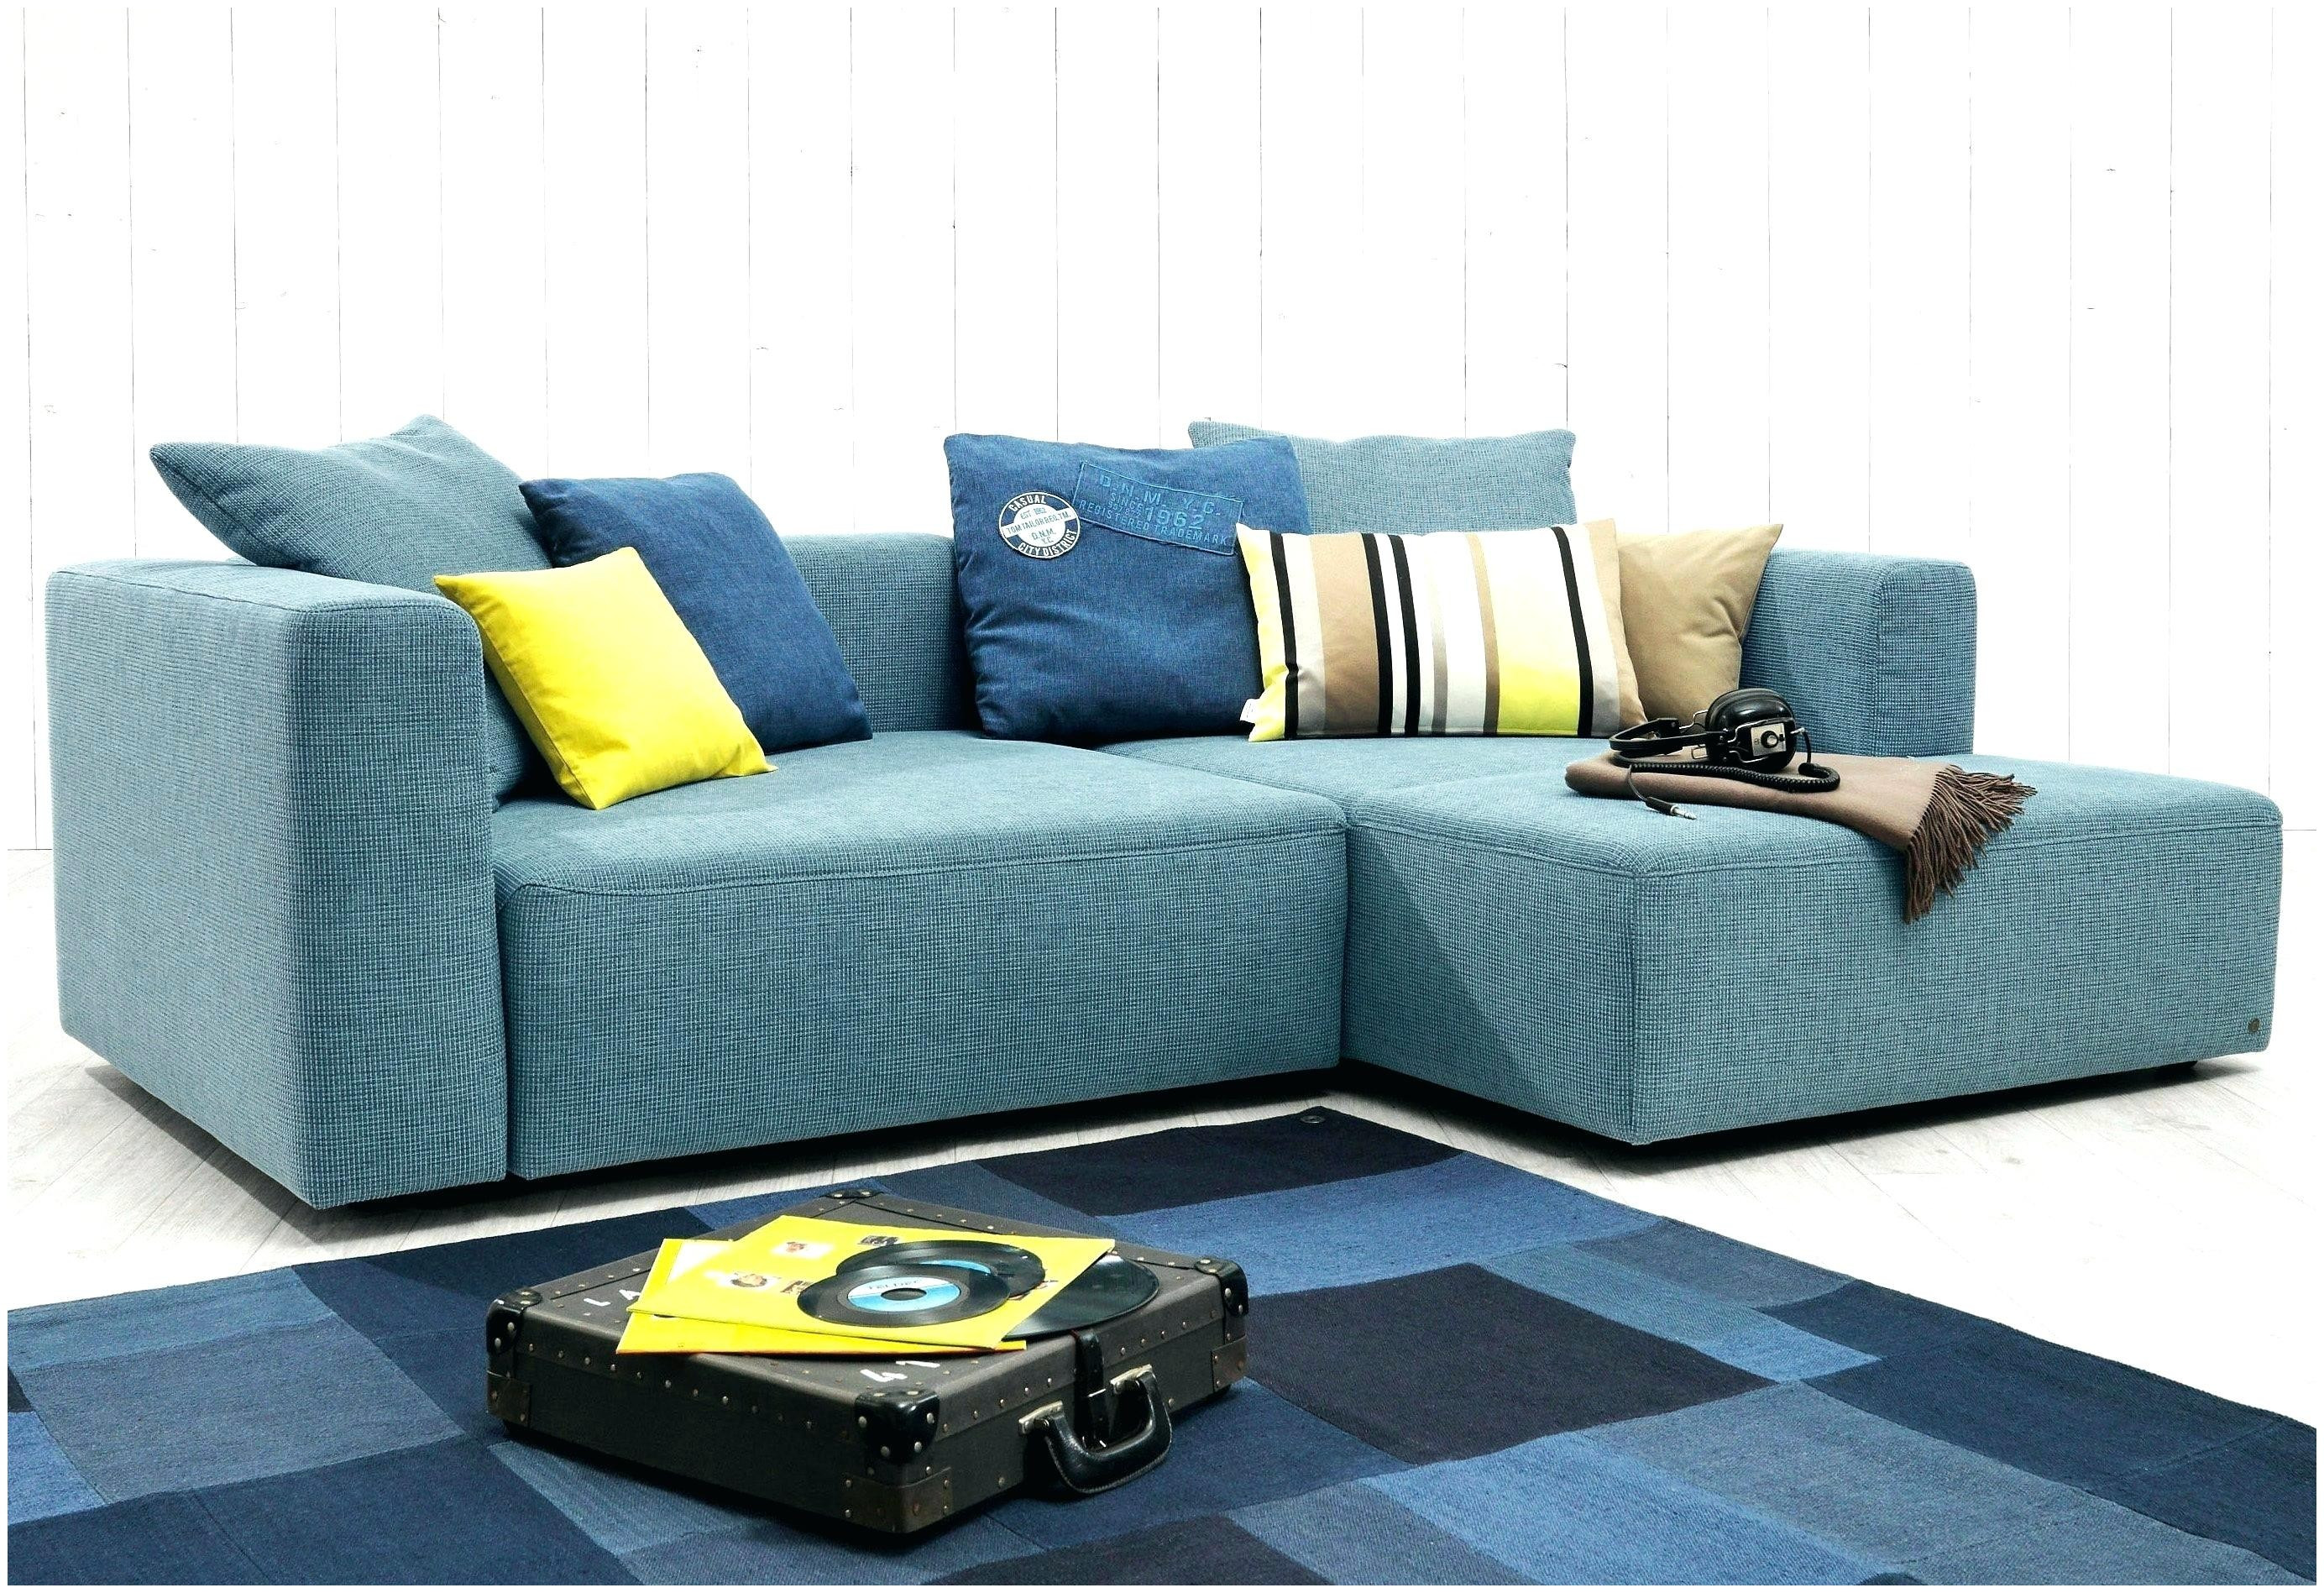 Tom Tailor Sofa
 Couch Kissen tom Tailor Couch sofa Big Abig Cubea